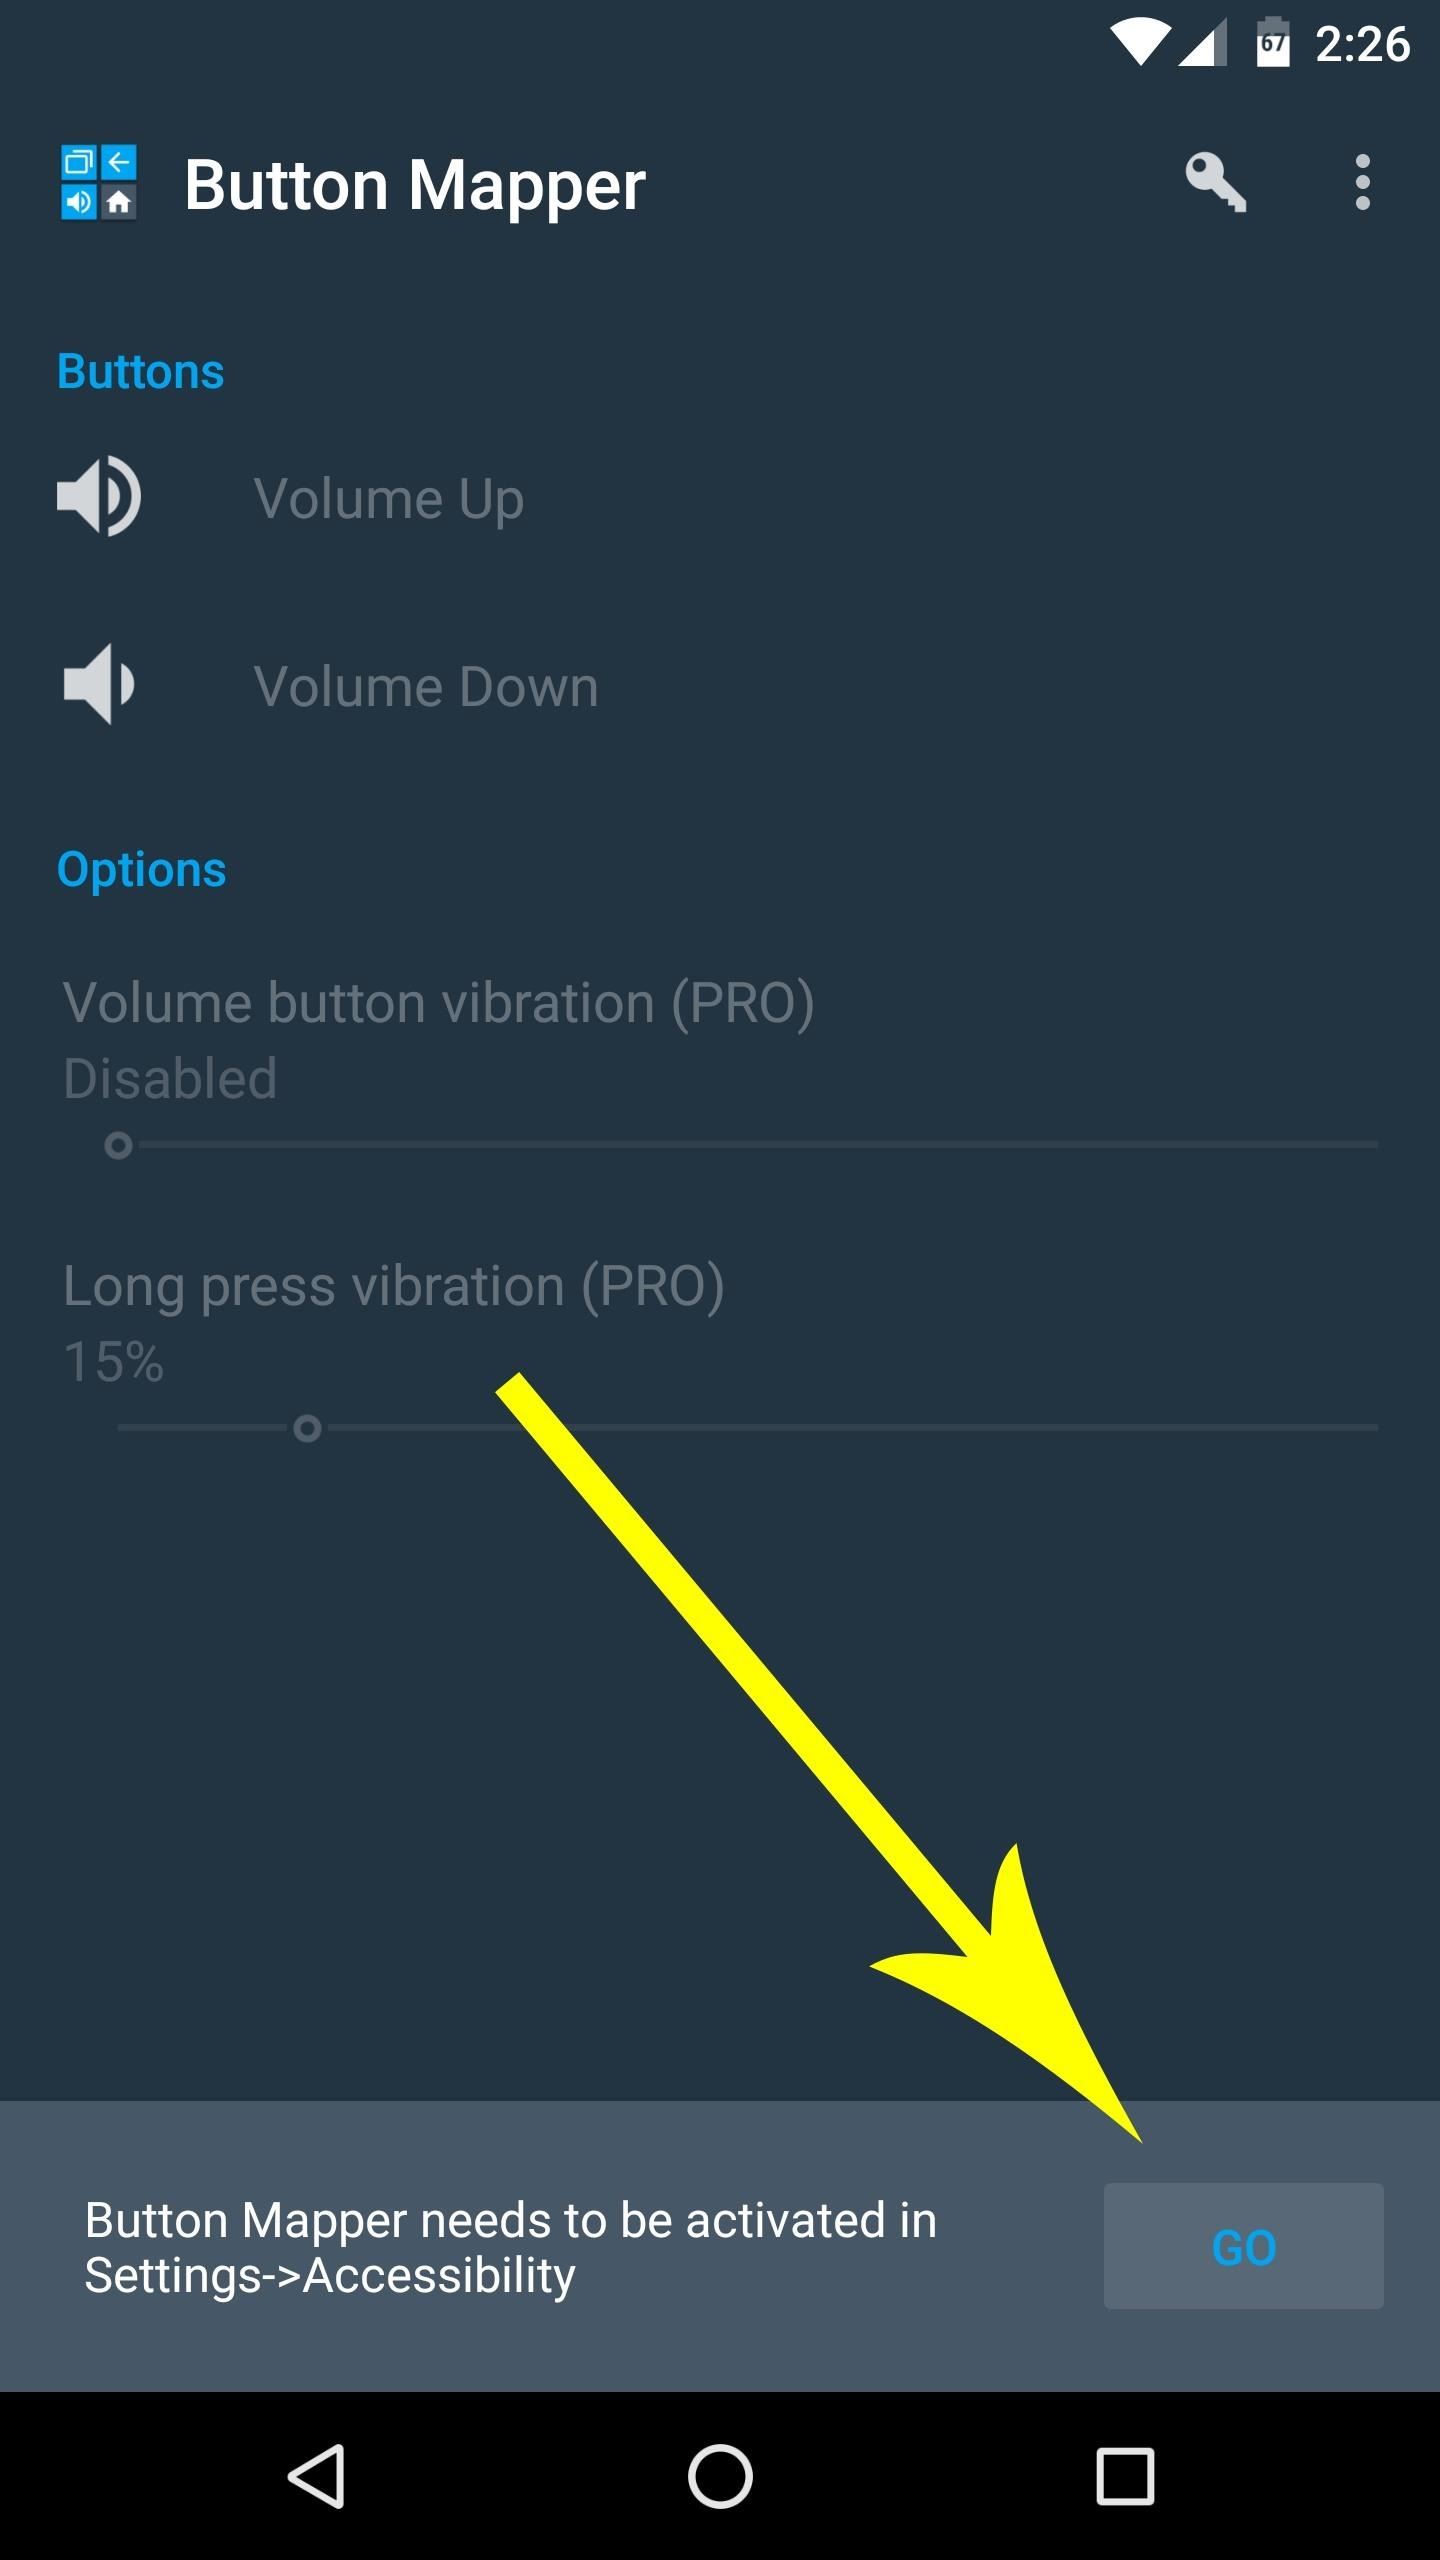 Turn Your Android's Buttons into Shortcuts for Almost Anything